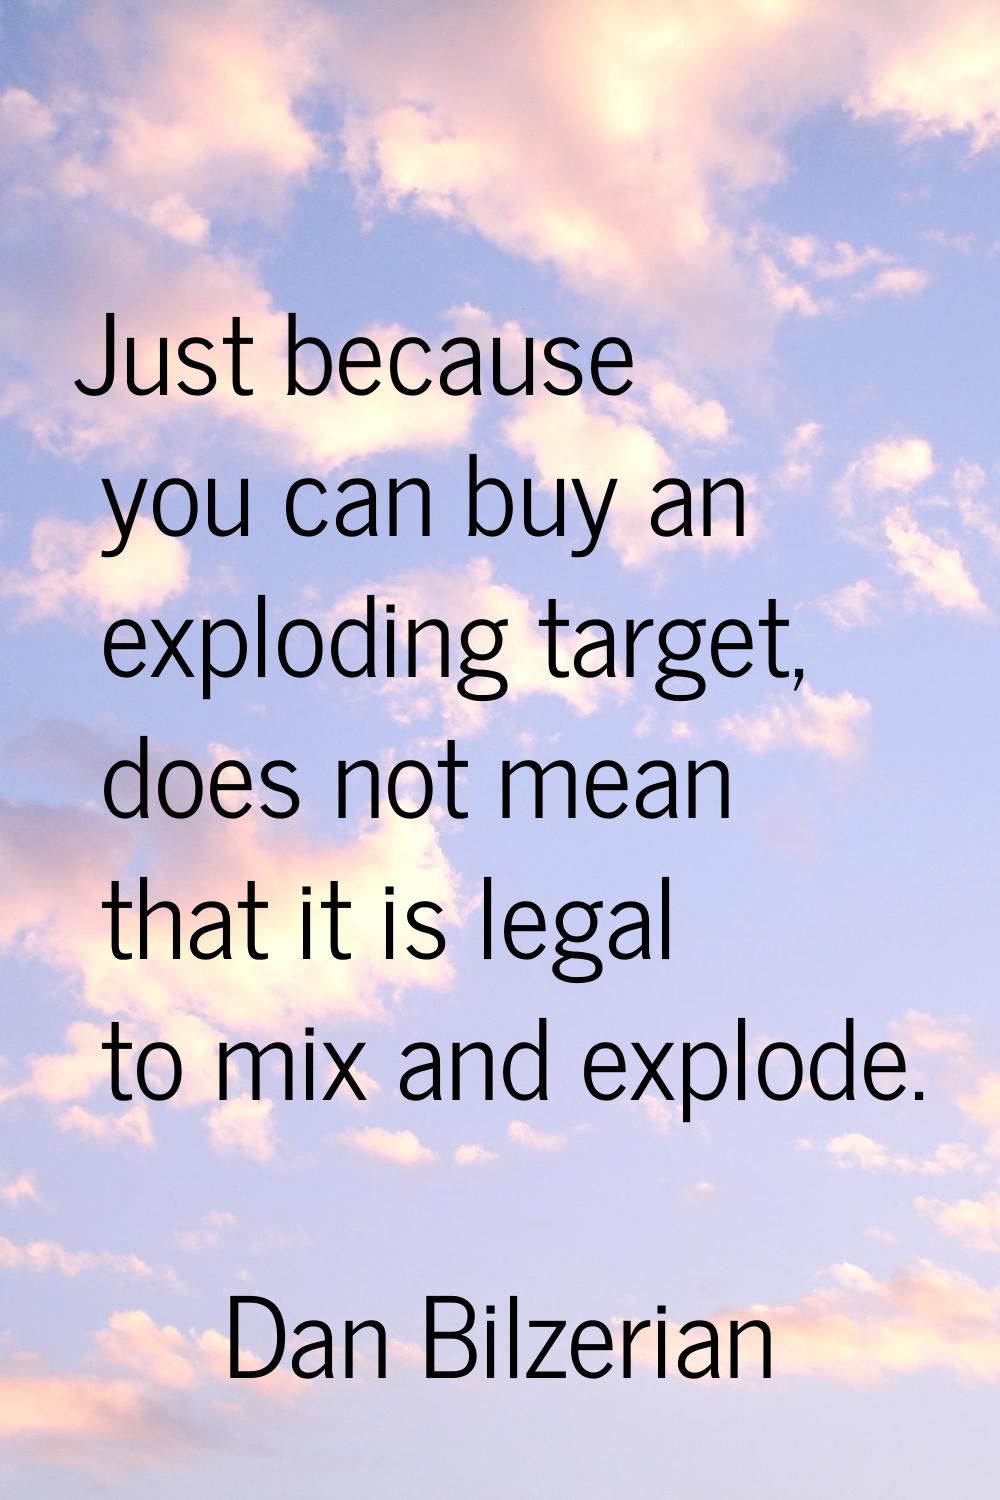 Just because you can buy an exploding target, does not mean that it is legal to mix and explode.